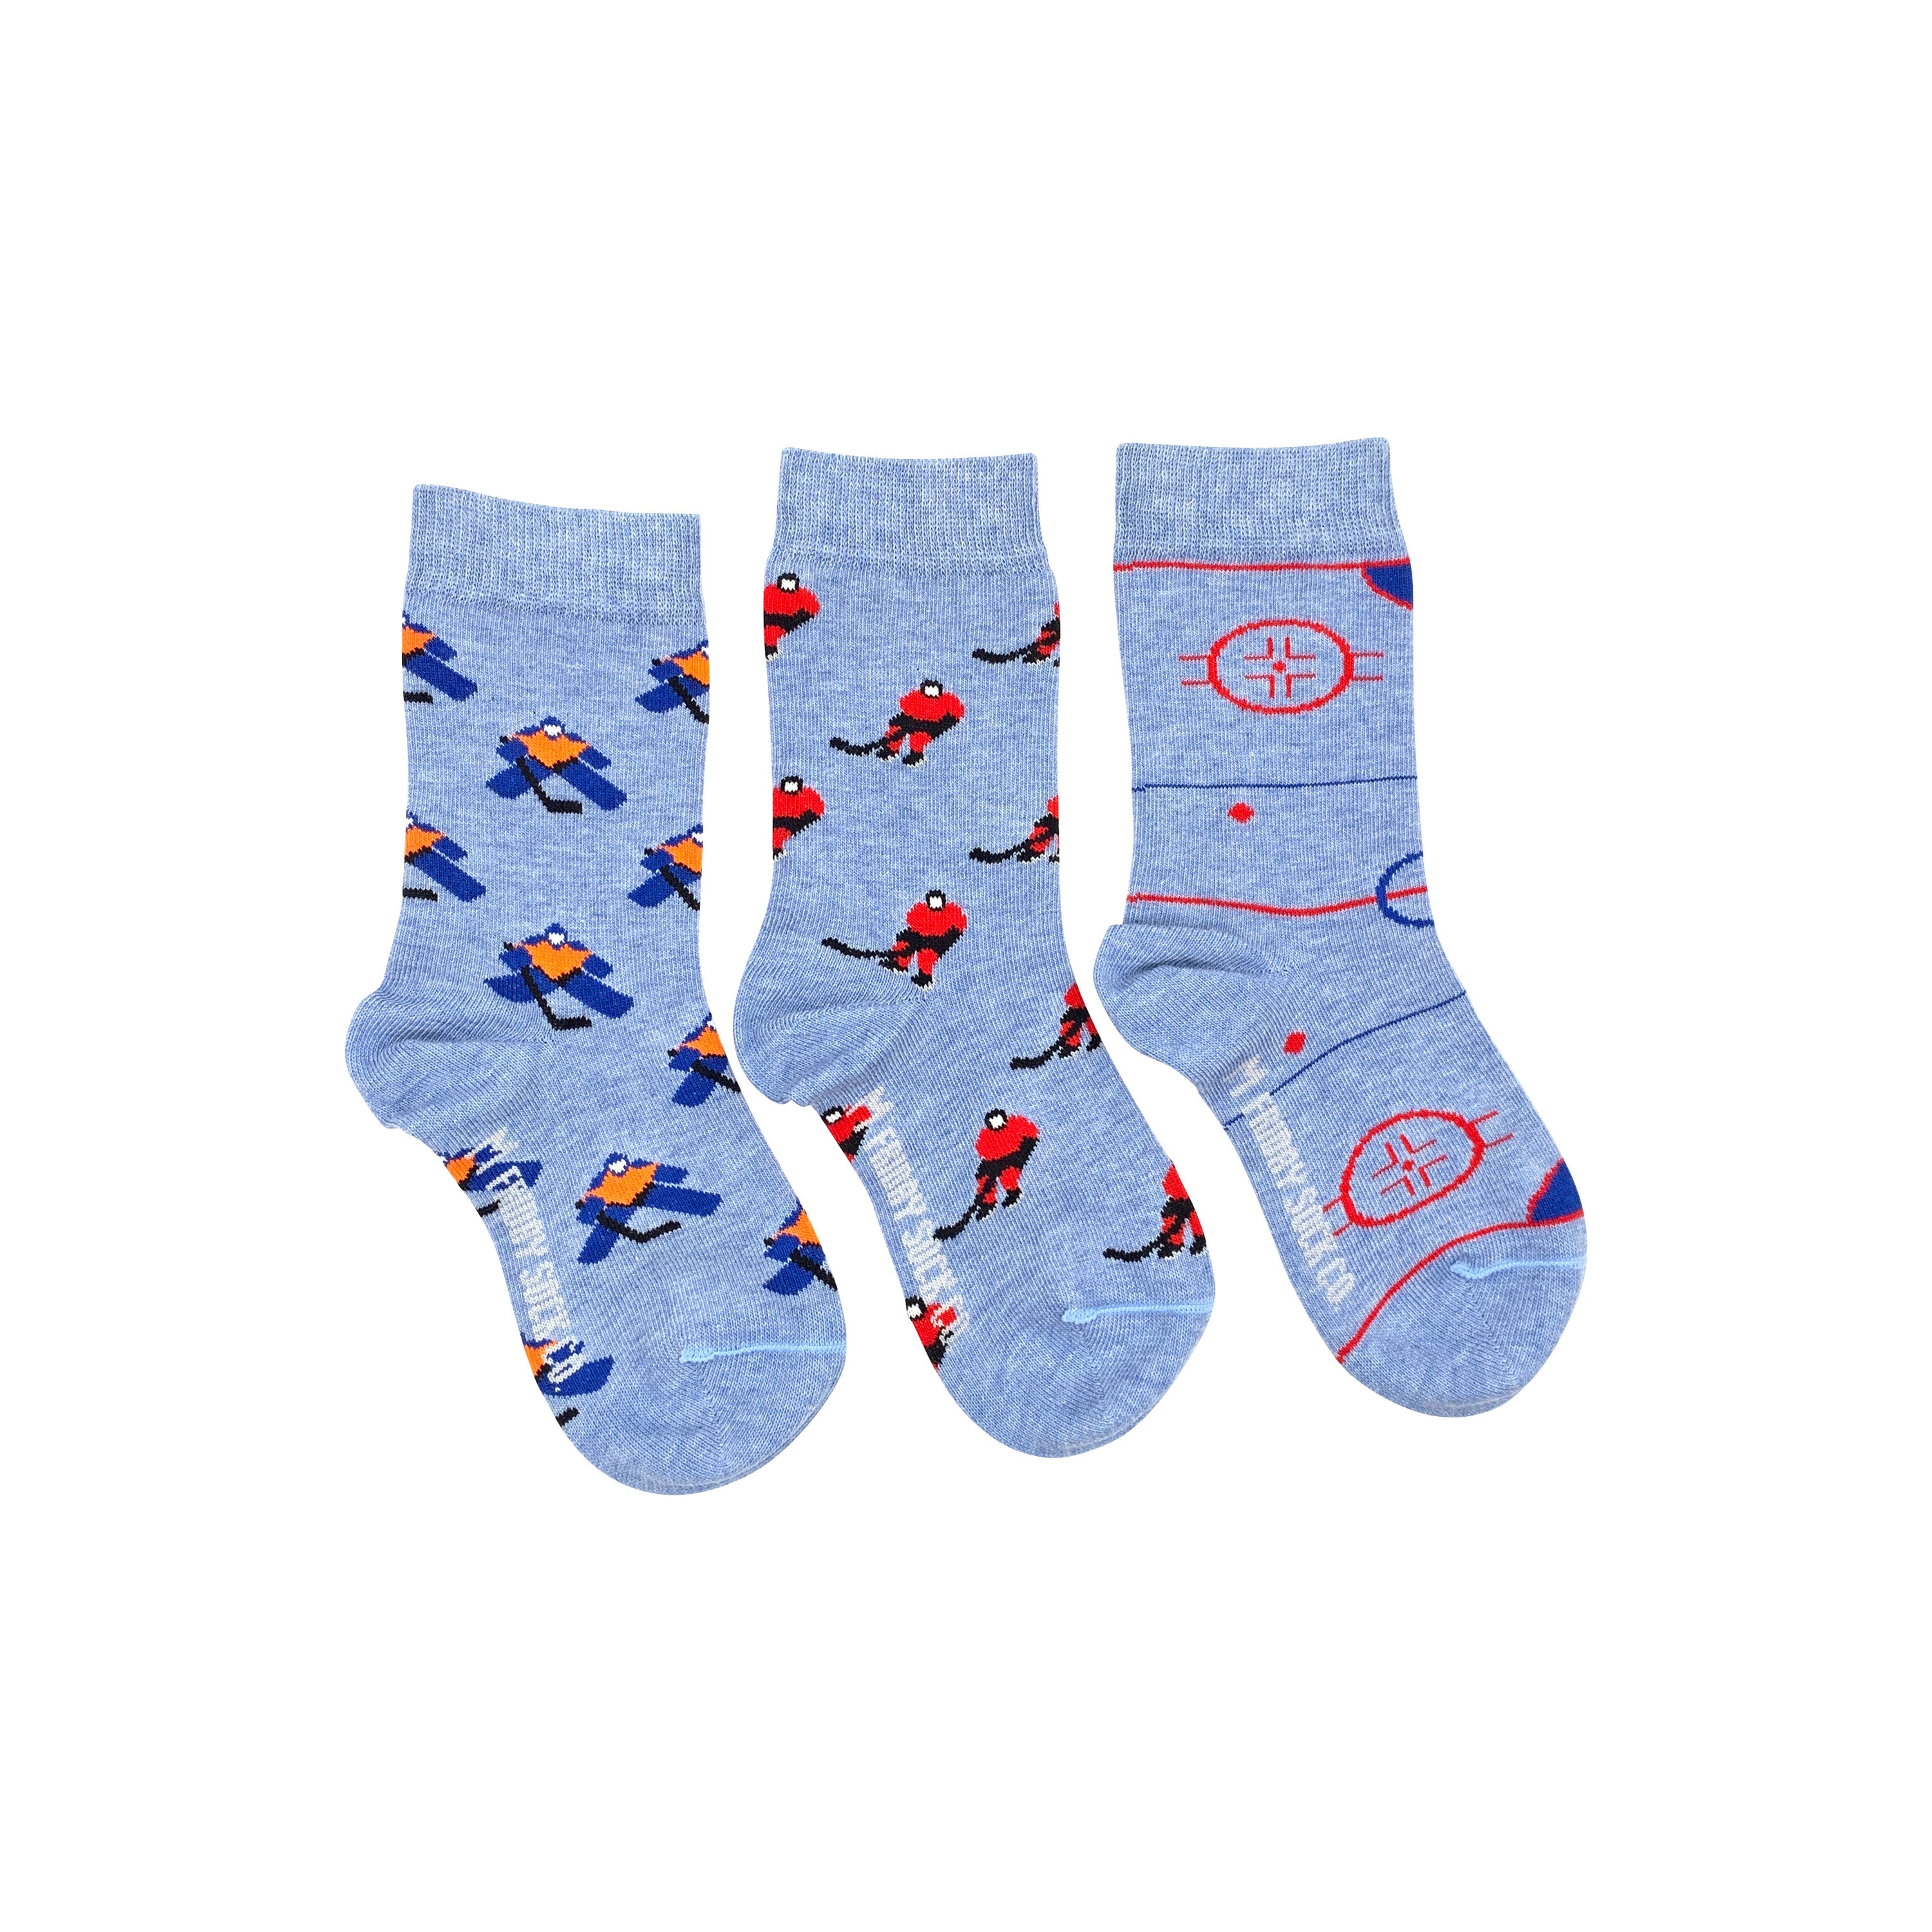 GAME OVER - Chaussettes pour joueurs - Many Mornings